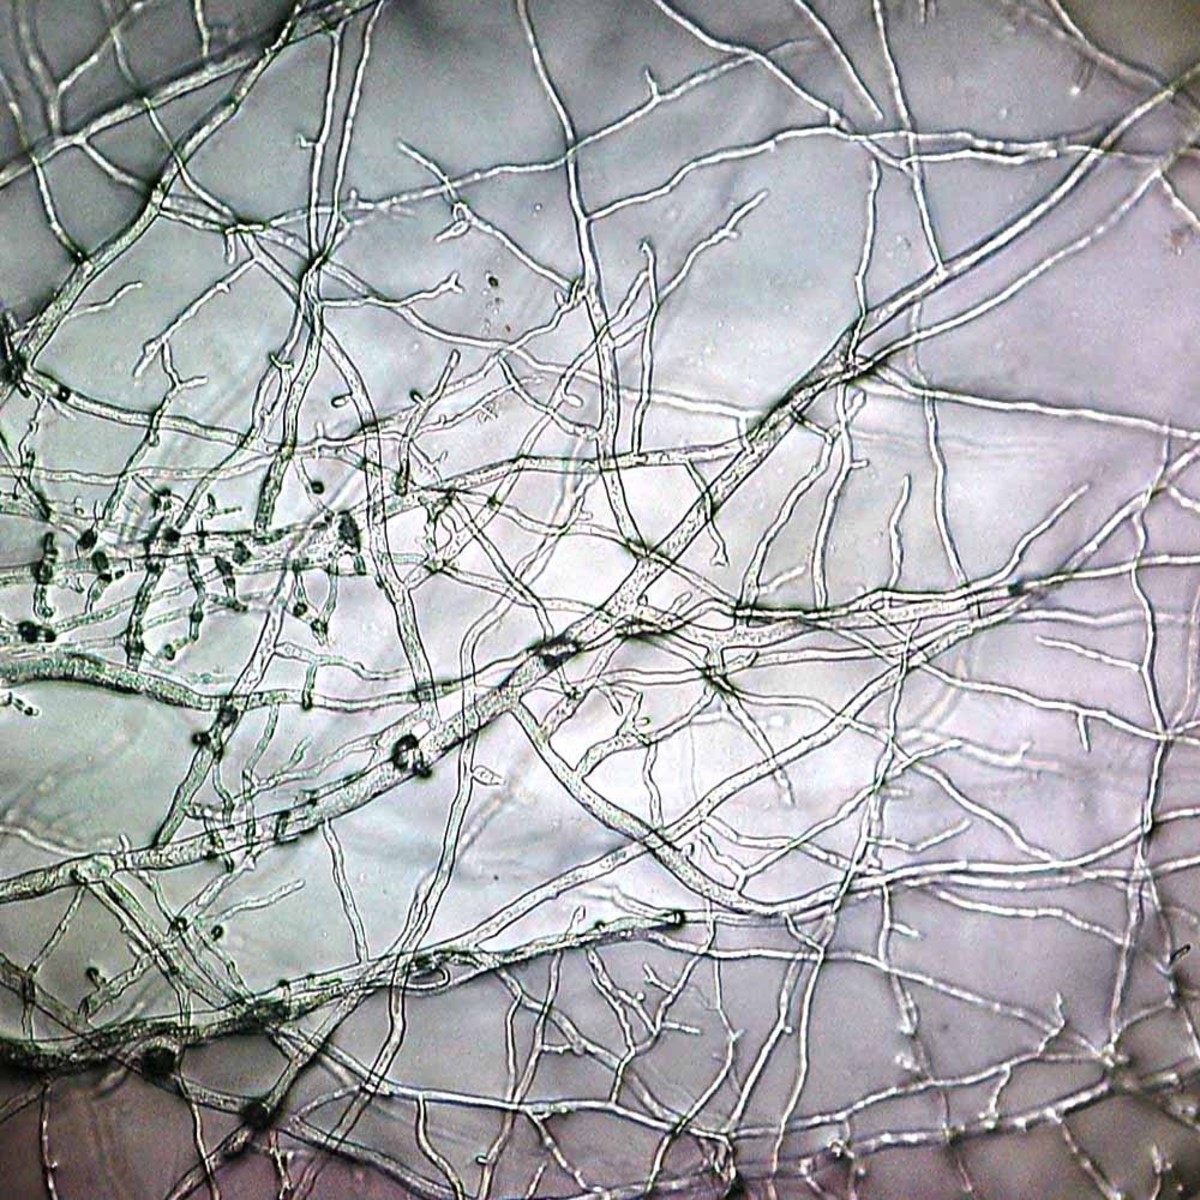 The mycelium or body of a mold (a type of fungus) as seen under a microscope